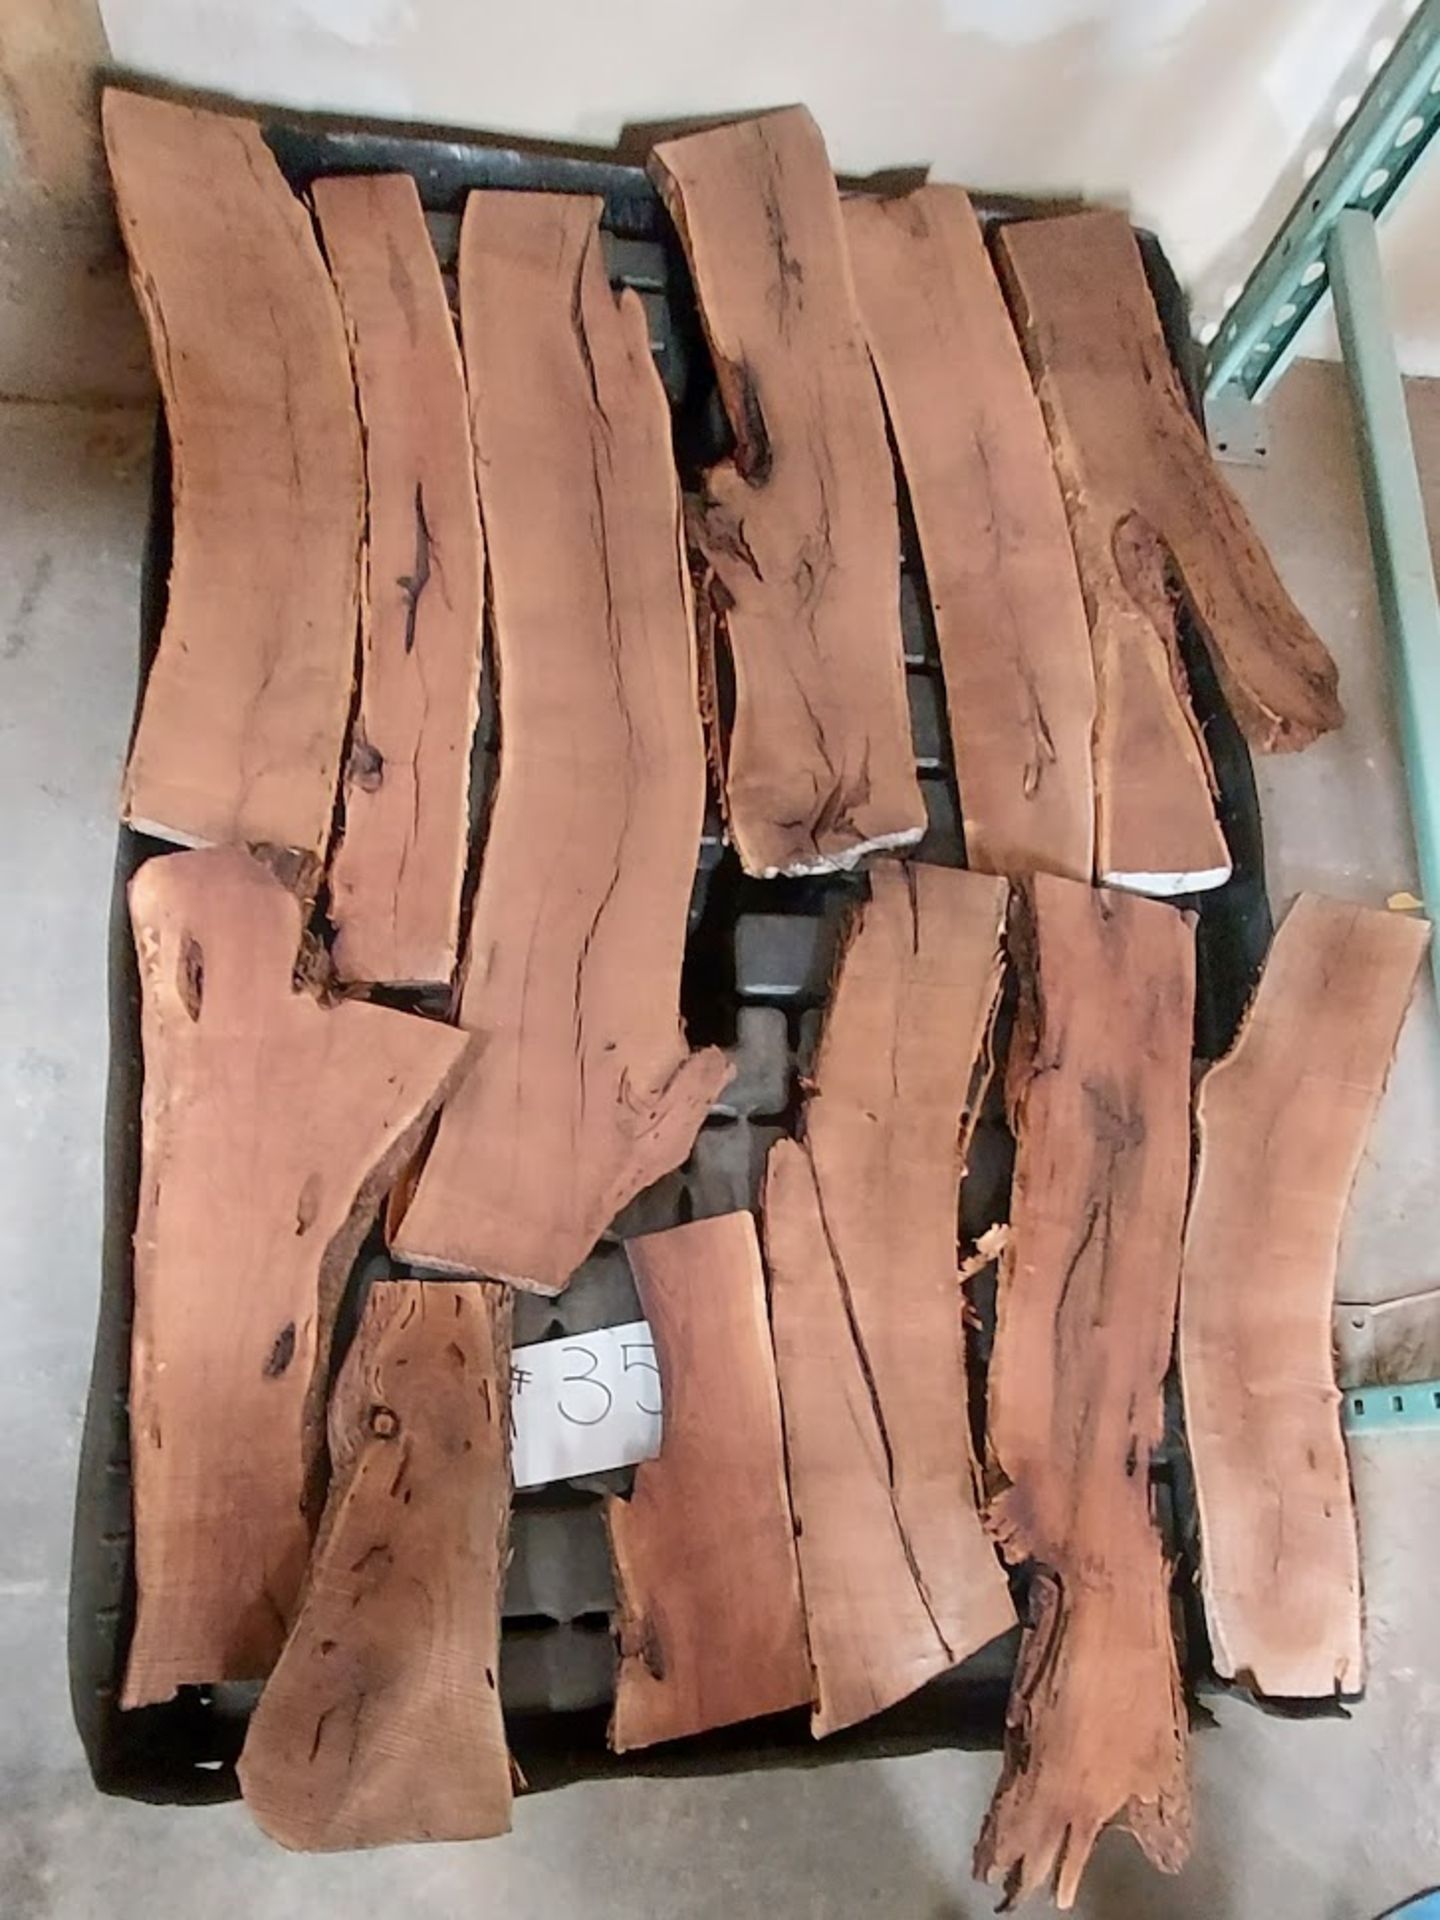 12 - Mesquite Hardwood Live Edge Boards, (pallet not included) - Image 2 of 2